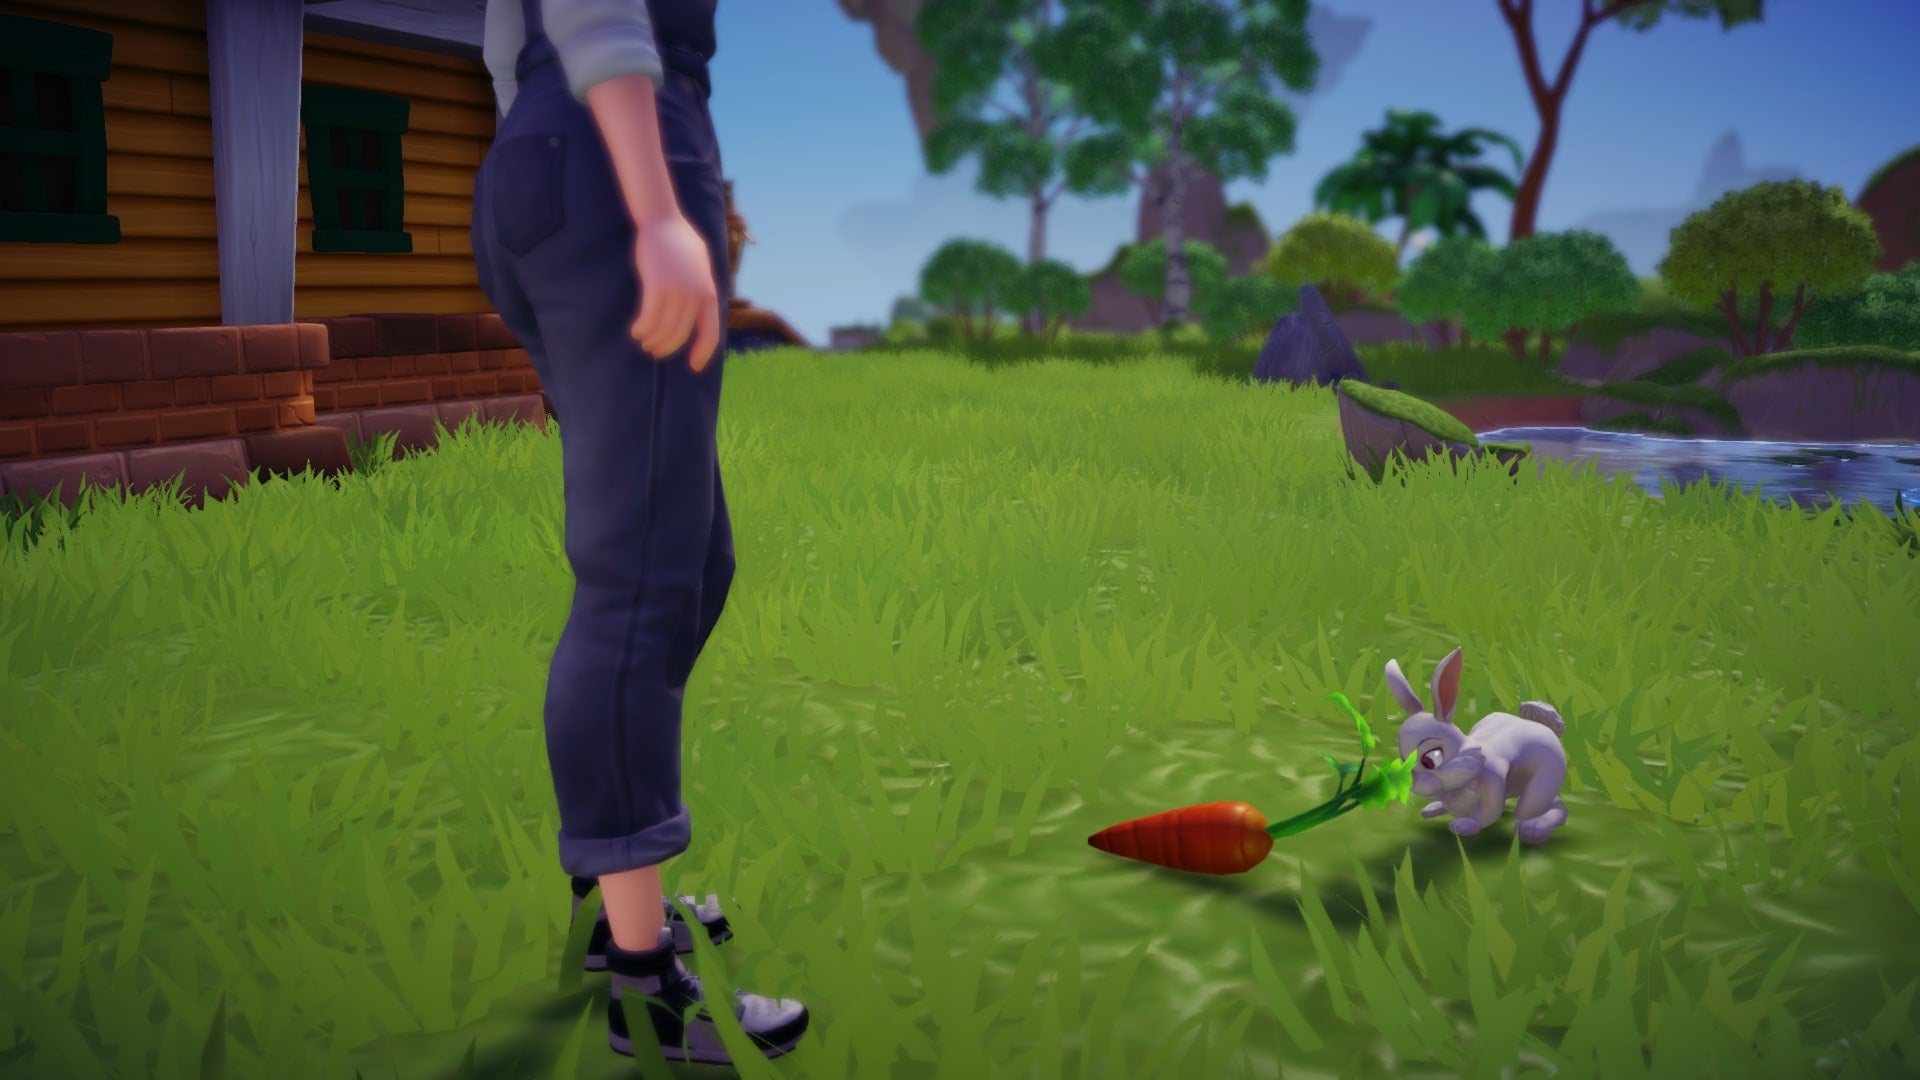 A player looks at a rabbit in Disney Dreamlight Valley